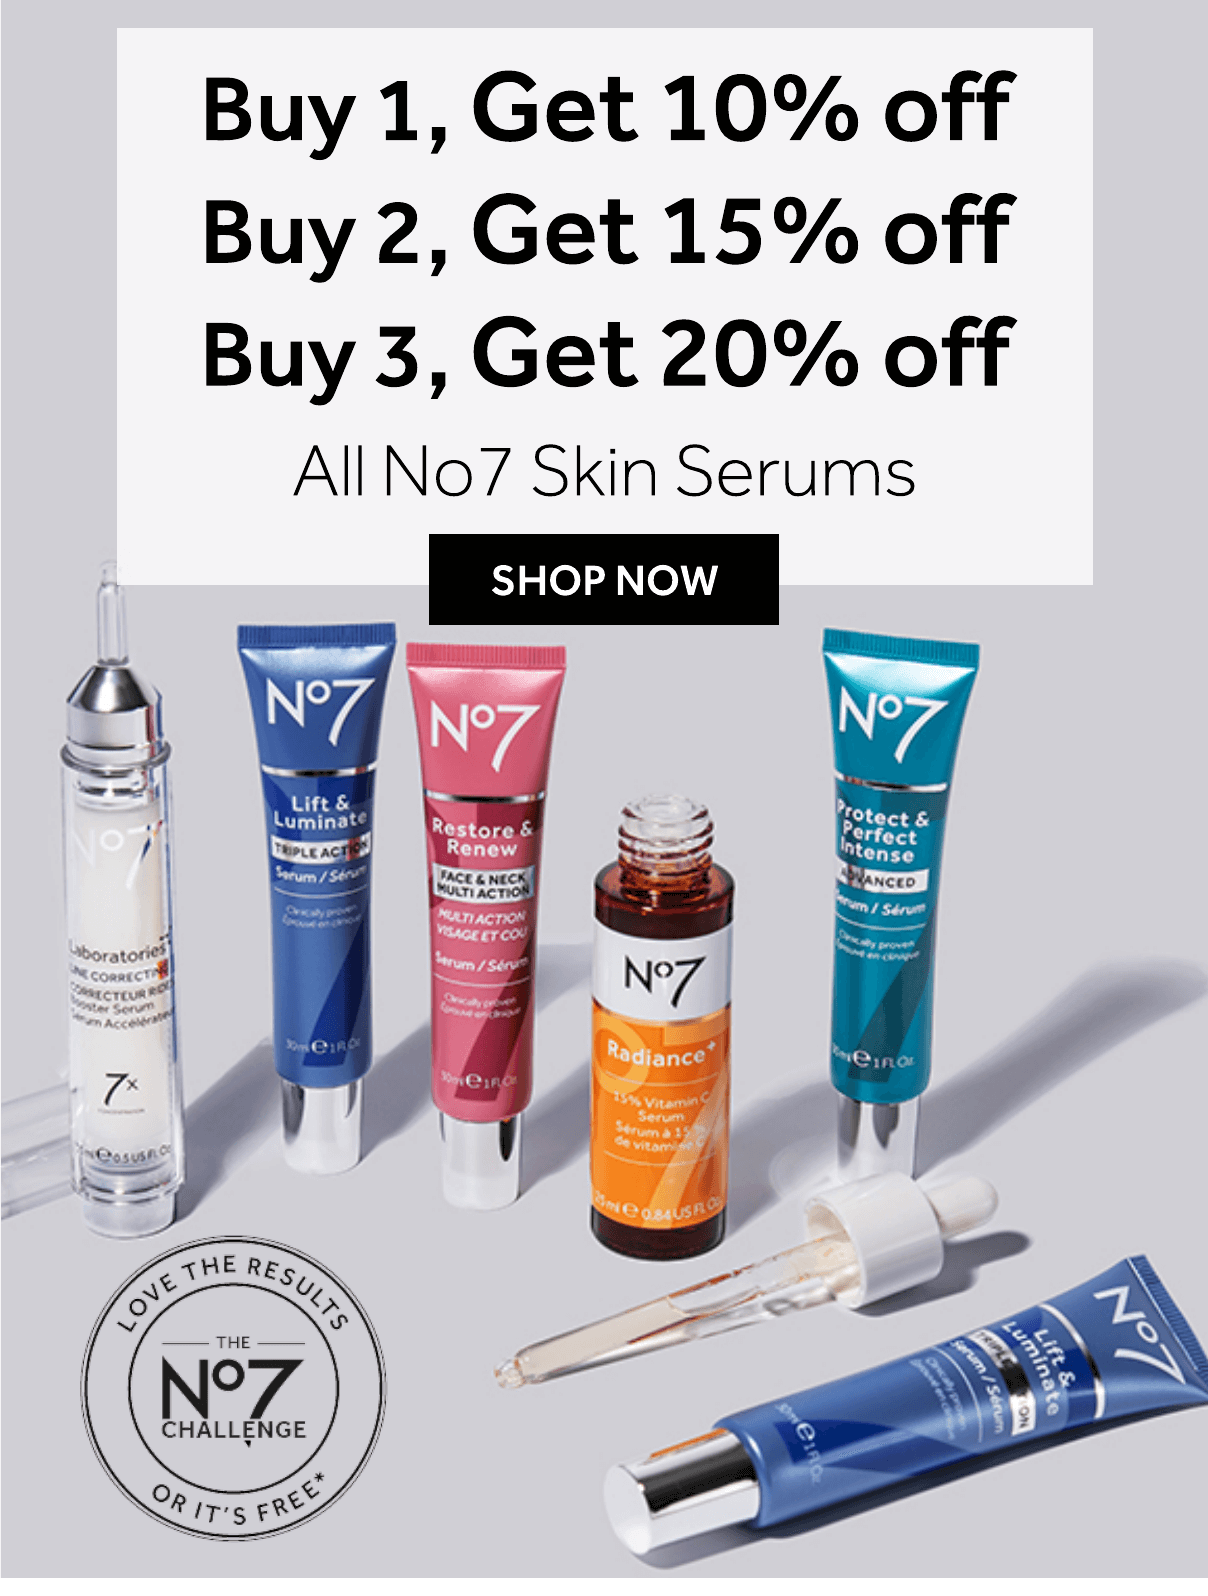 Boots No7 gift set with 11 'quality' products now half price in sale -  Wales Online